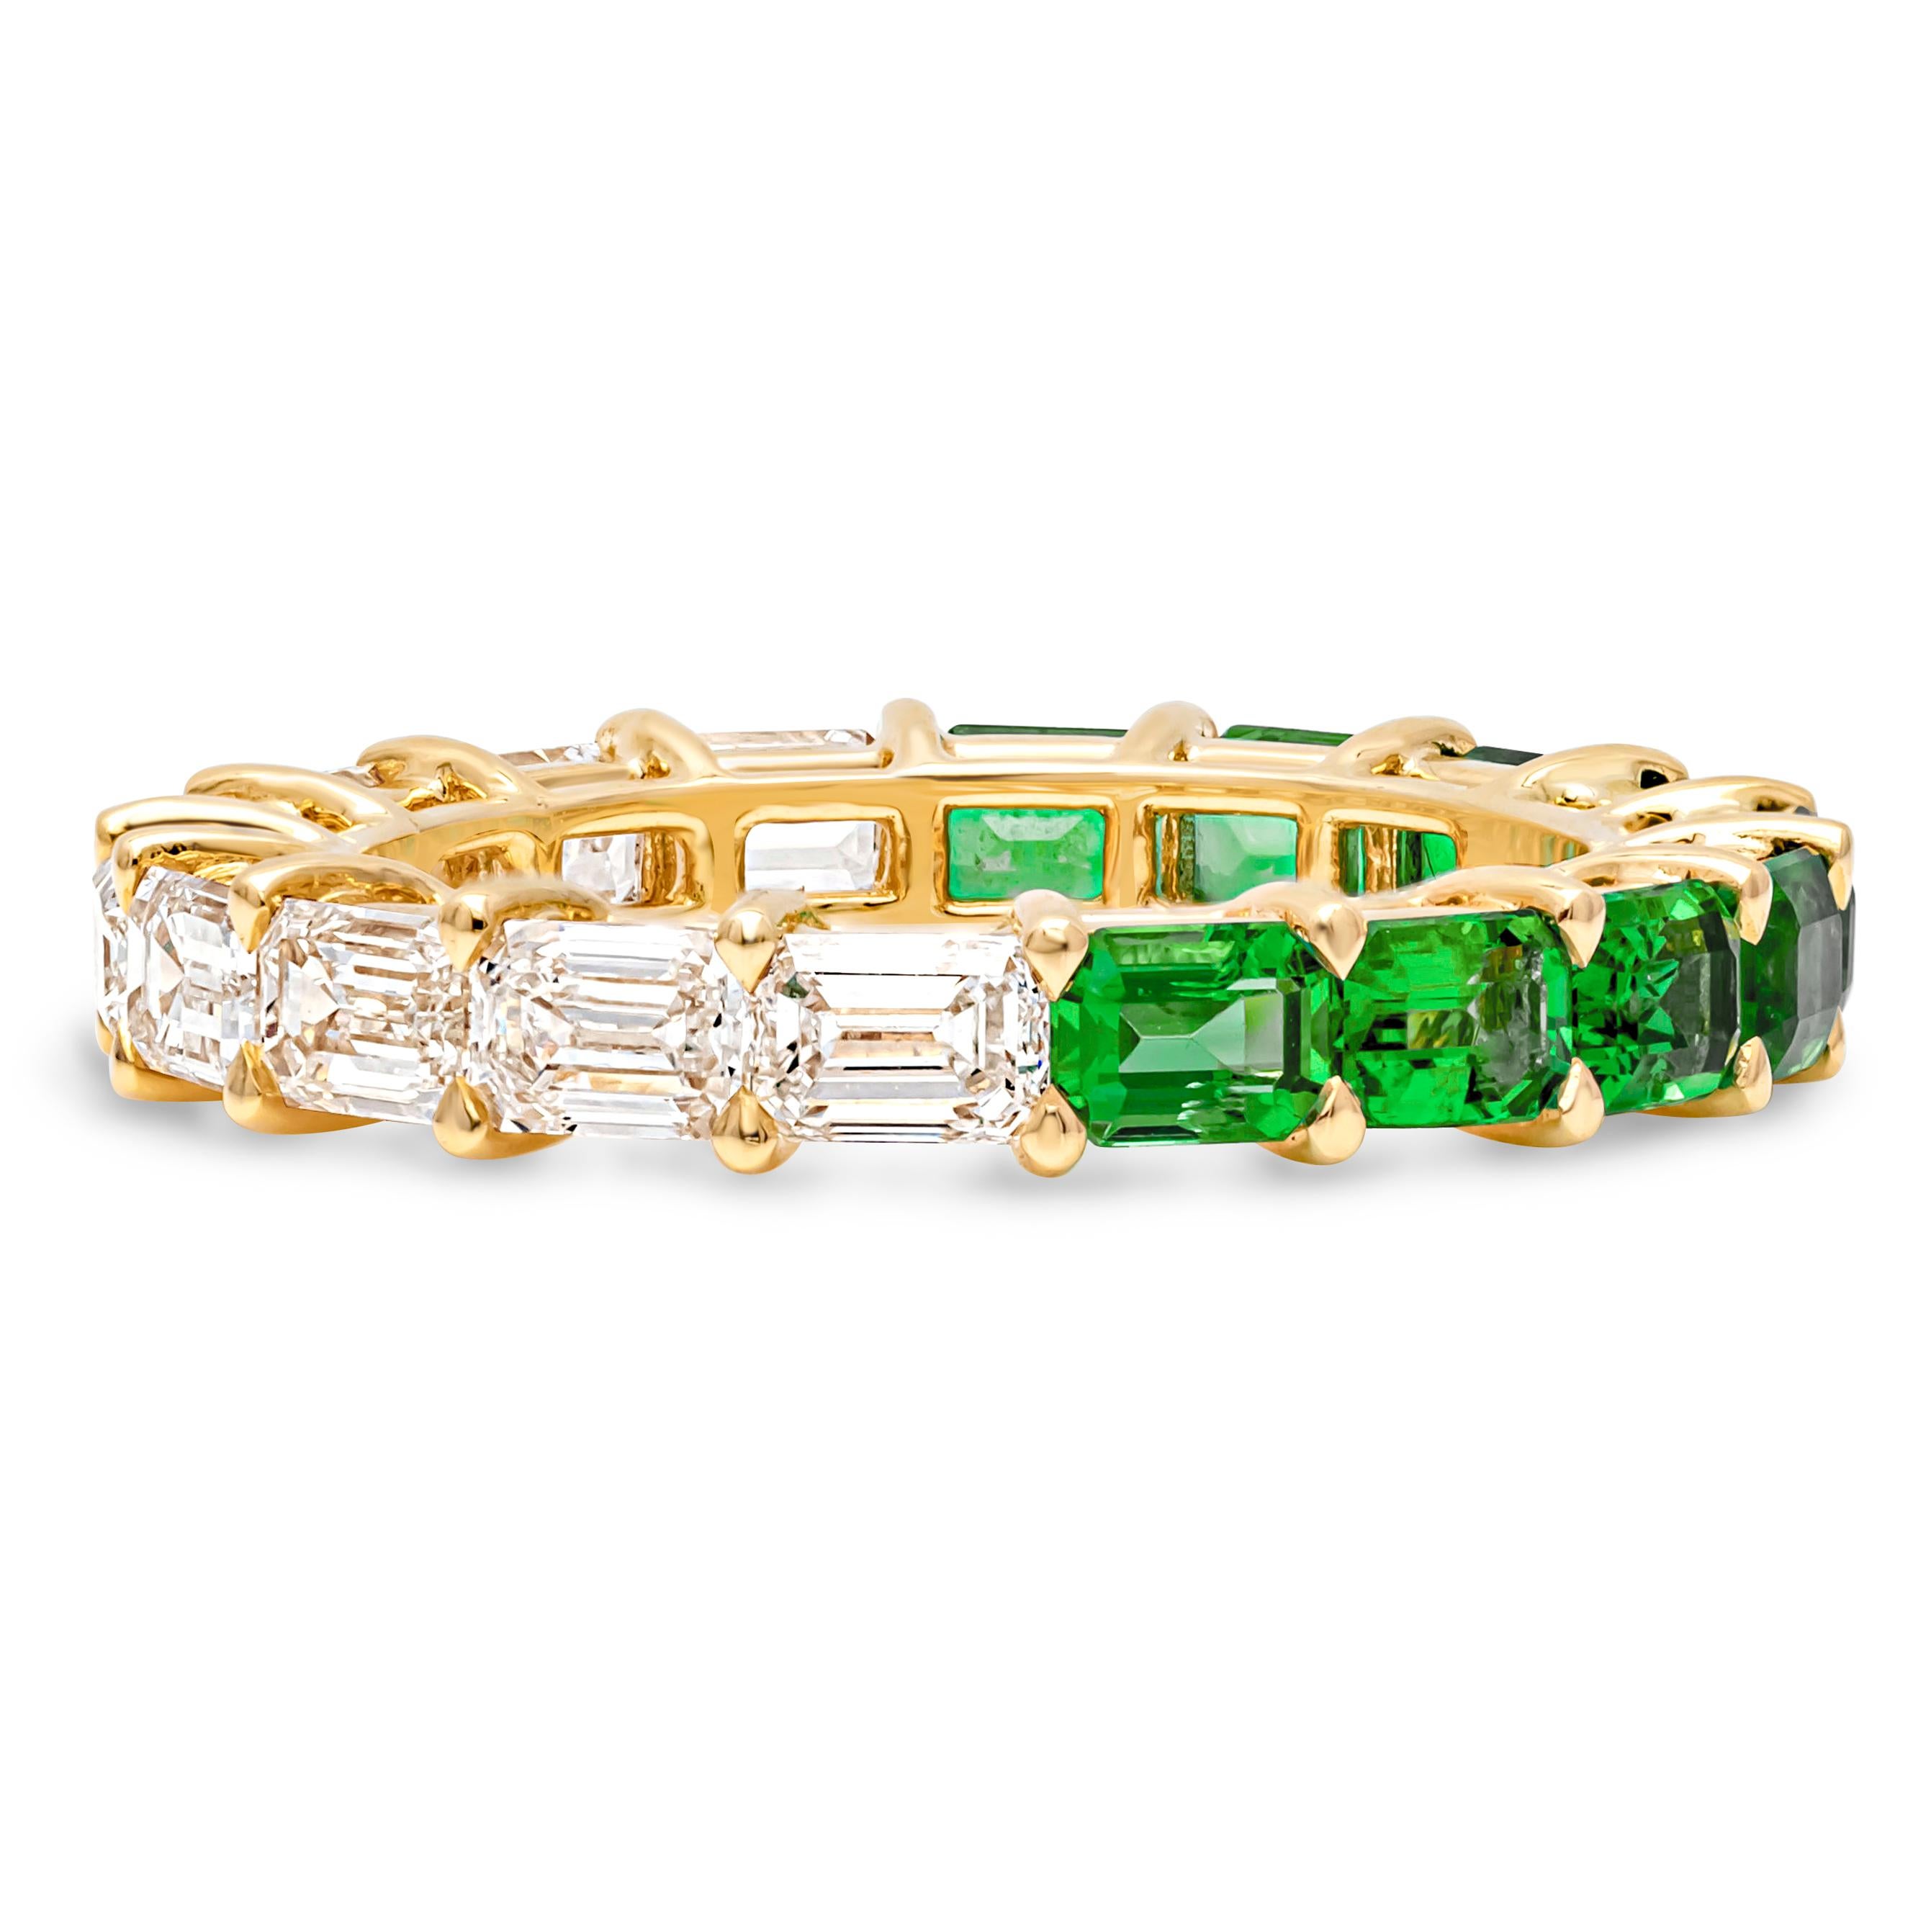 An appealing eternity wedding band style showcasing a color-rich 9 octagon cut green emerald weighing 1.66 carats total and 9 brilliant emerald cut diamonds weighing 2.17 carats total, set in a shared prong setting. Eternity set in an open gallery